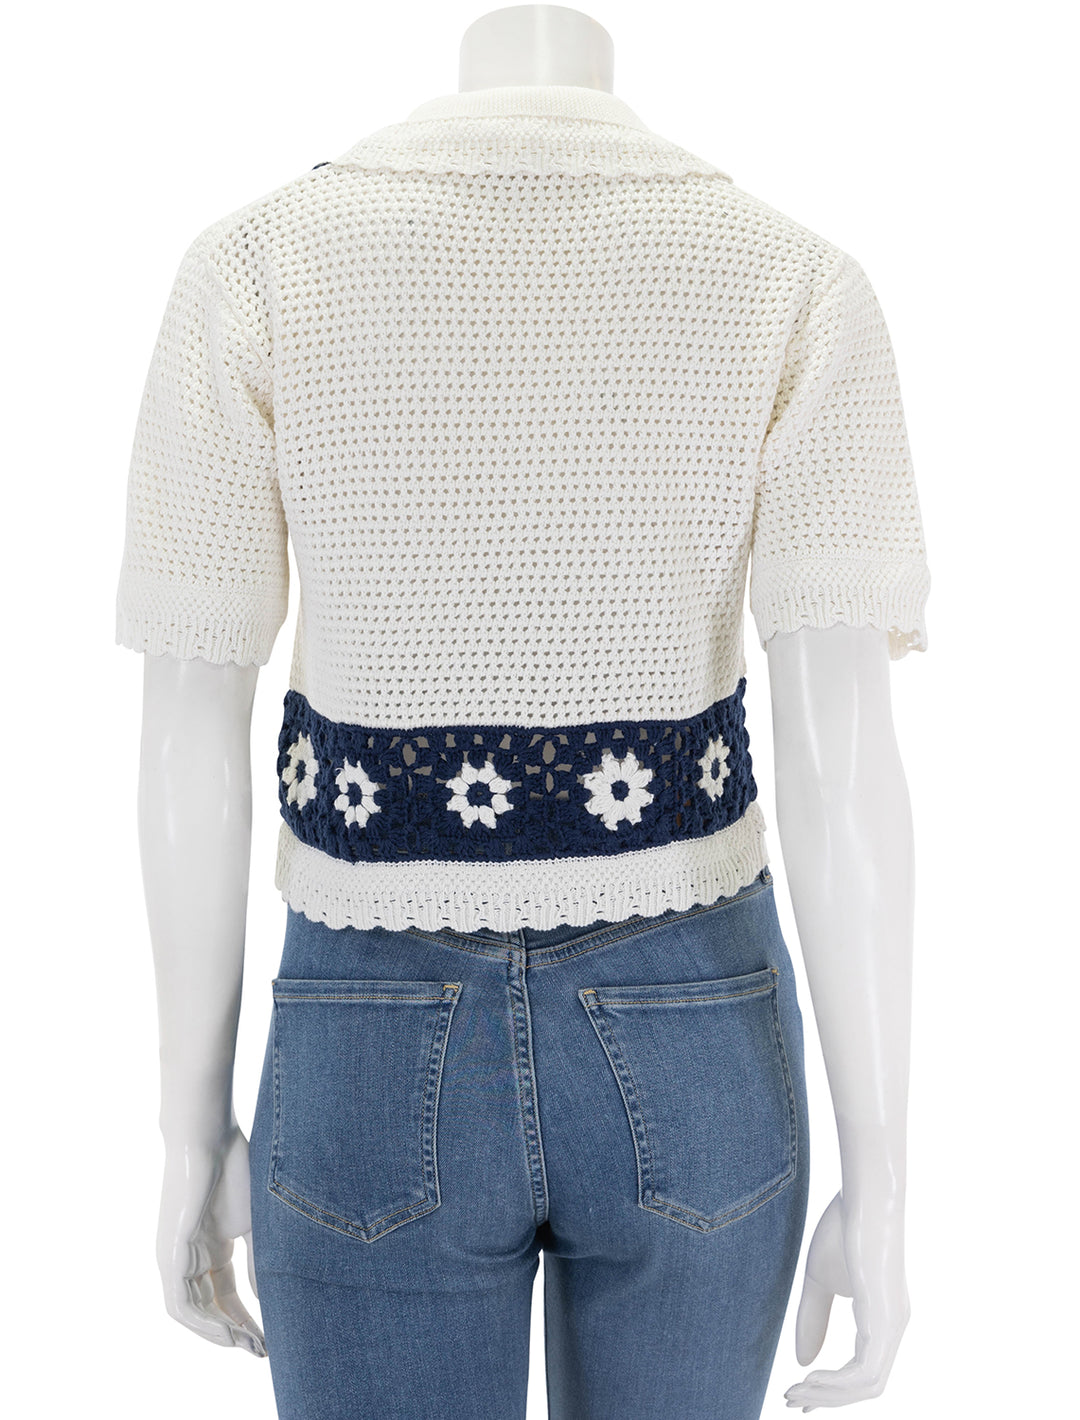 Back view of Rails' milan crochet daisy top in navy and cream.